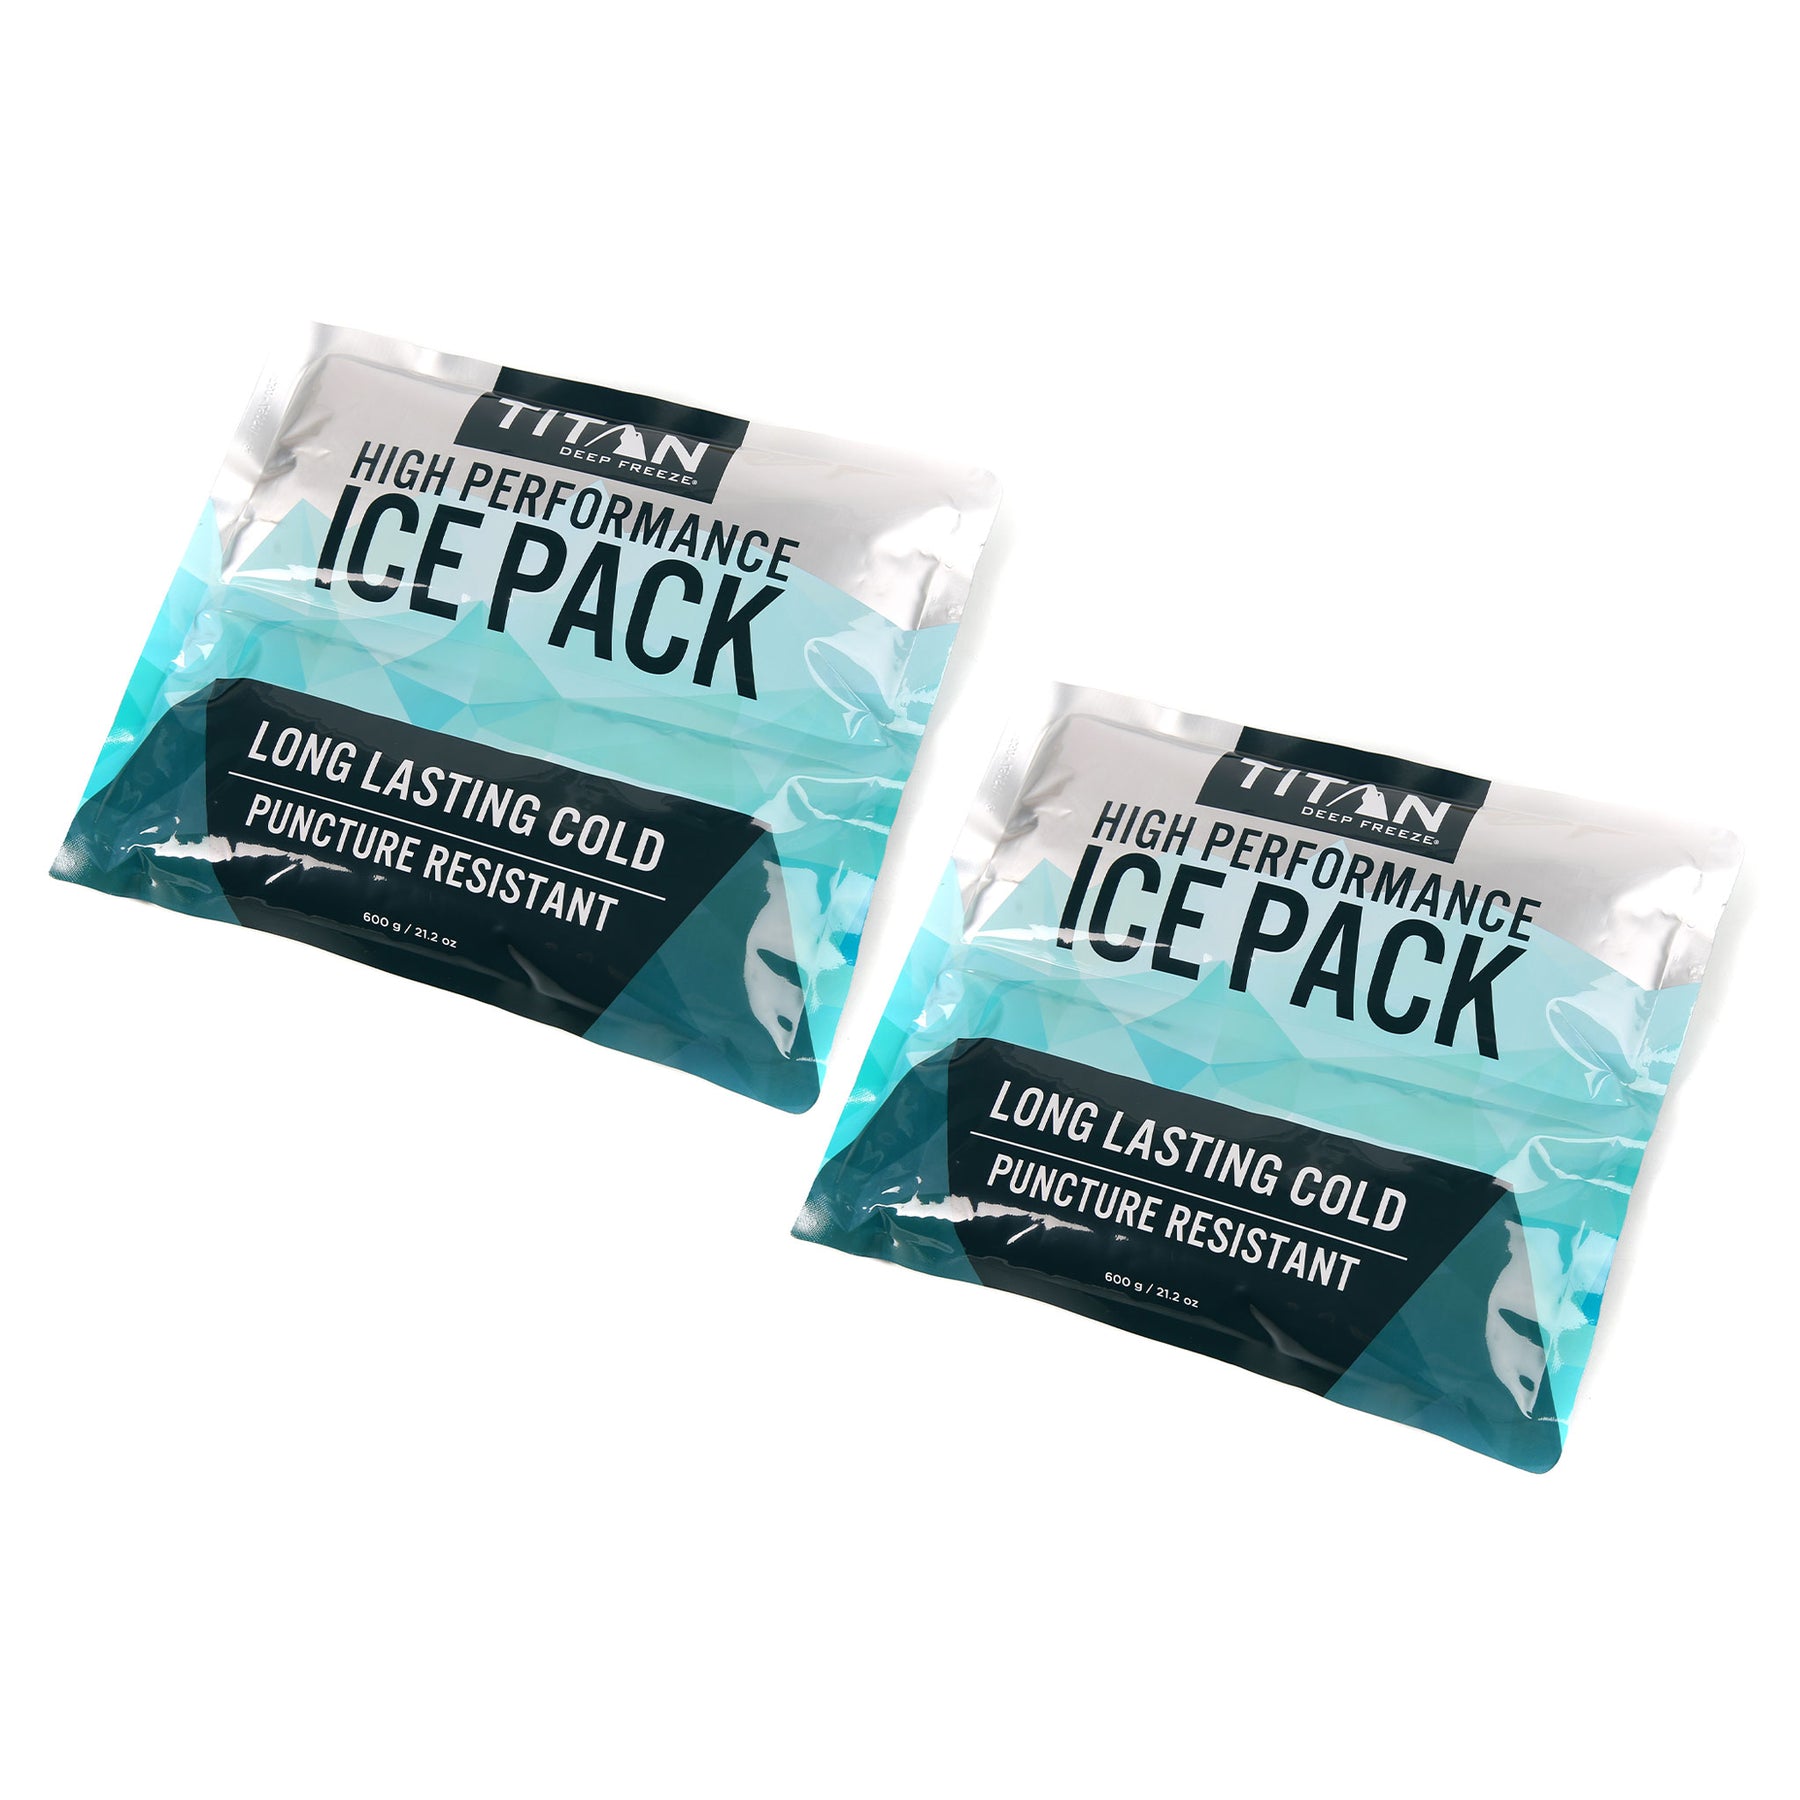 Arctic Zone High Performance Ice Pack for Lunch Boxes, Bags, or Coolers,  Set of 2 - 250 grams each